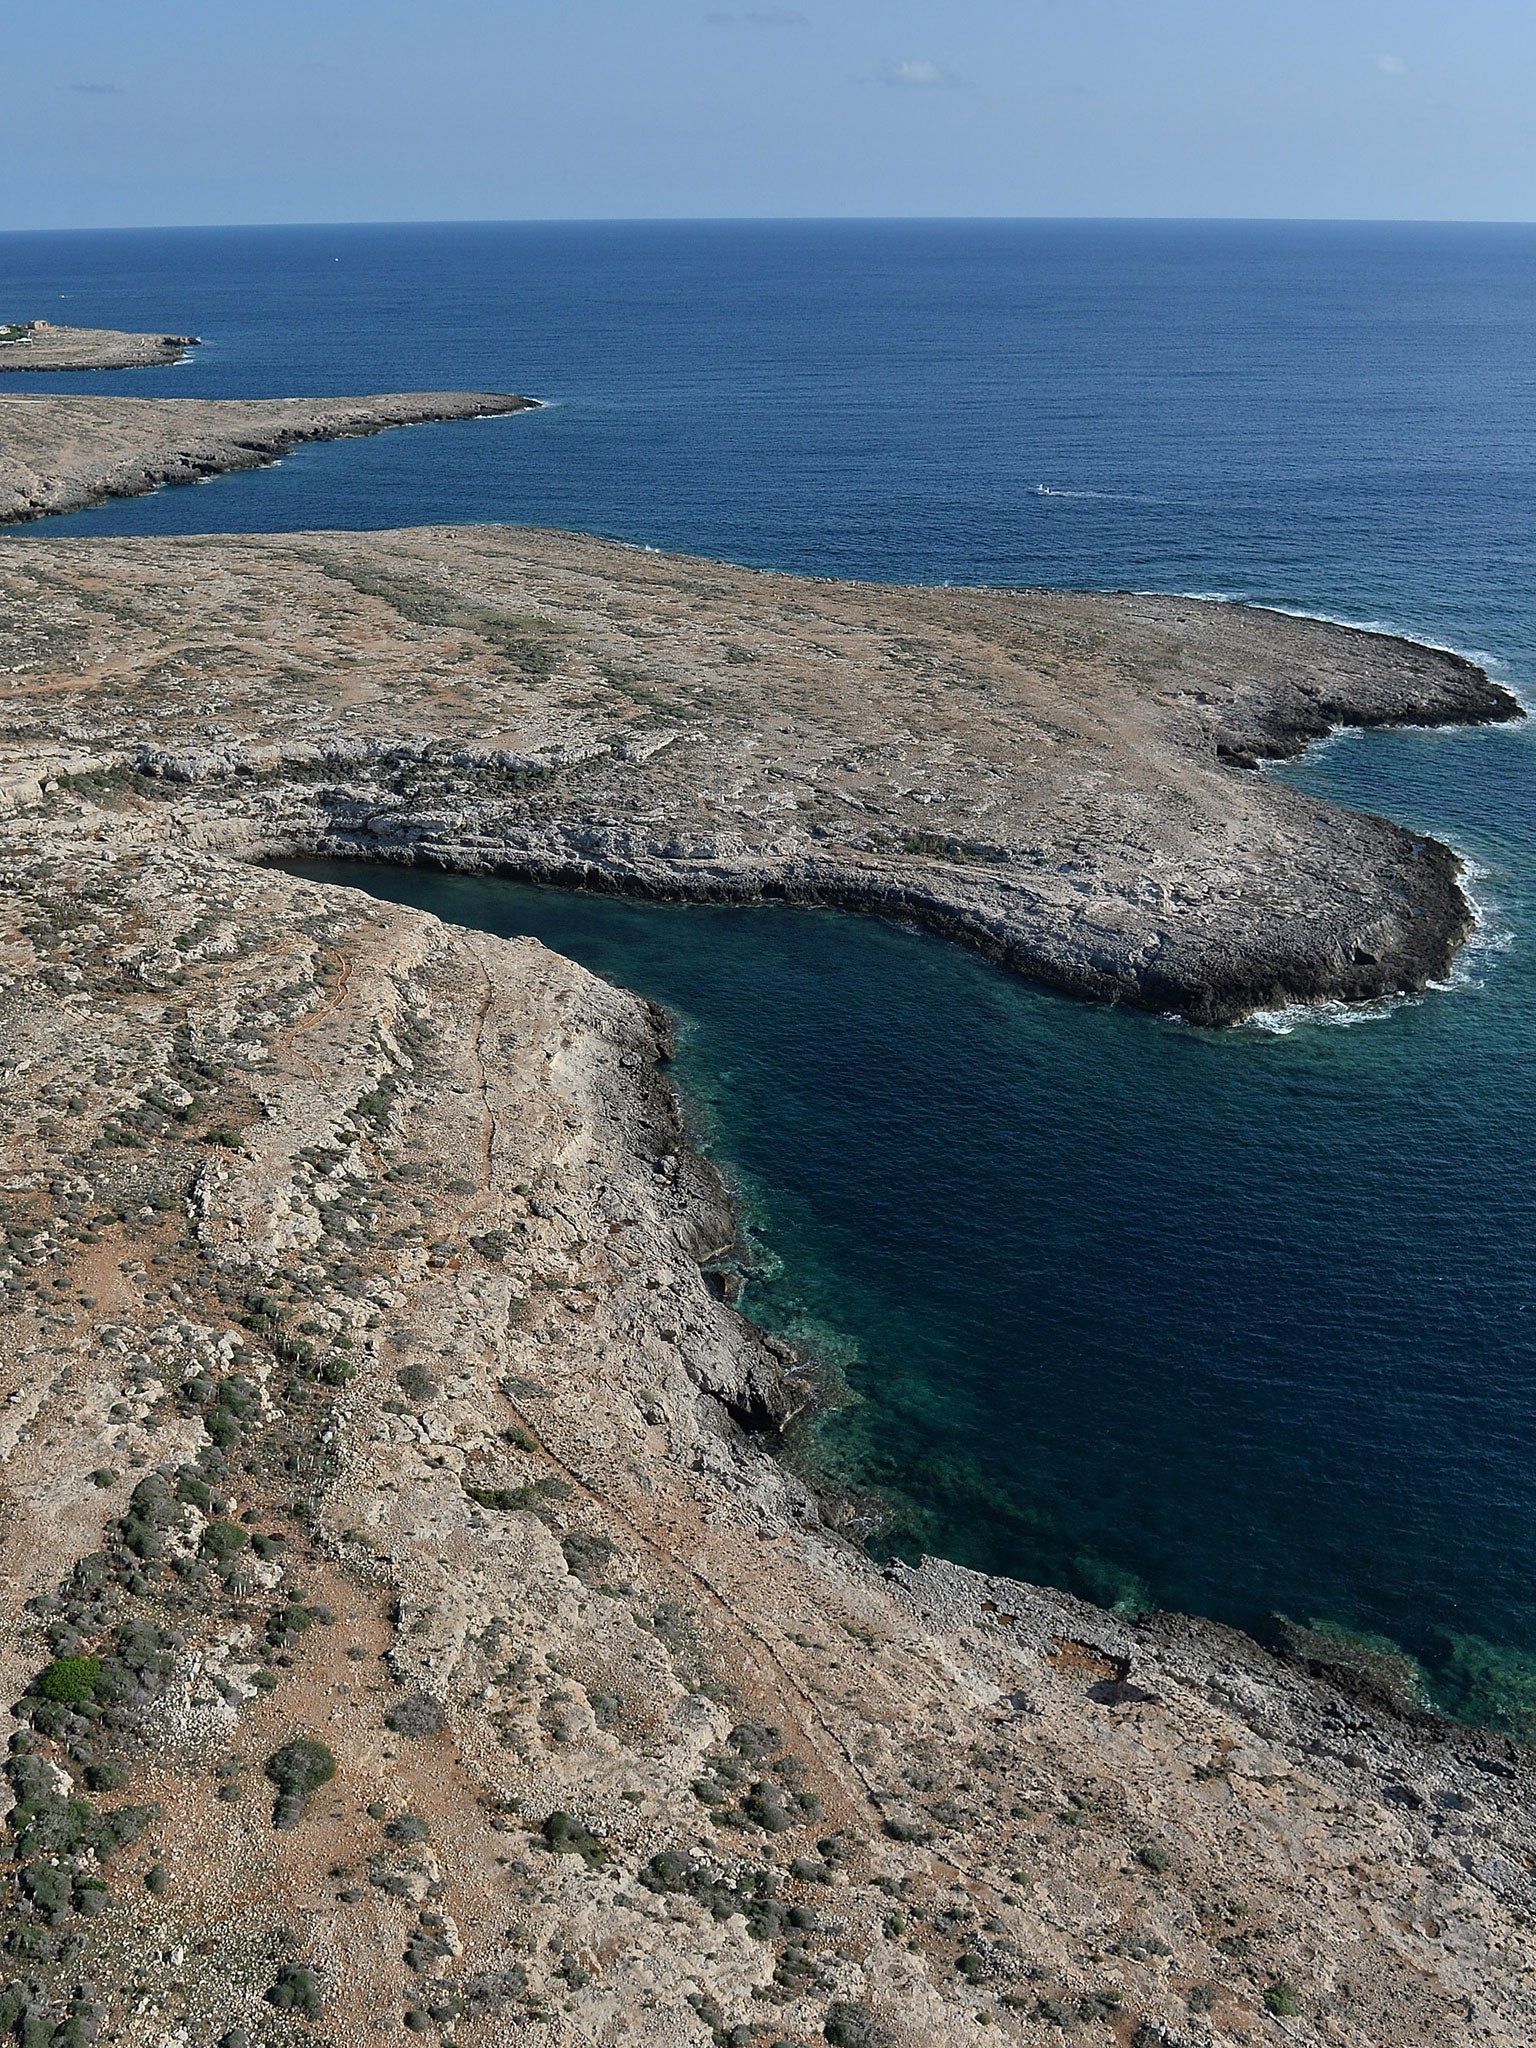 A section of the coast of the Italian island of Lampedusa where searches are being carried out